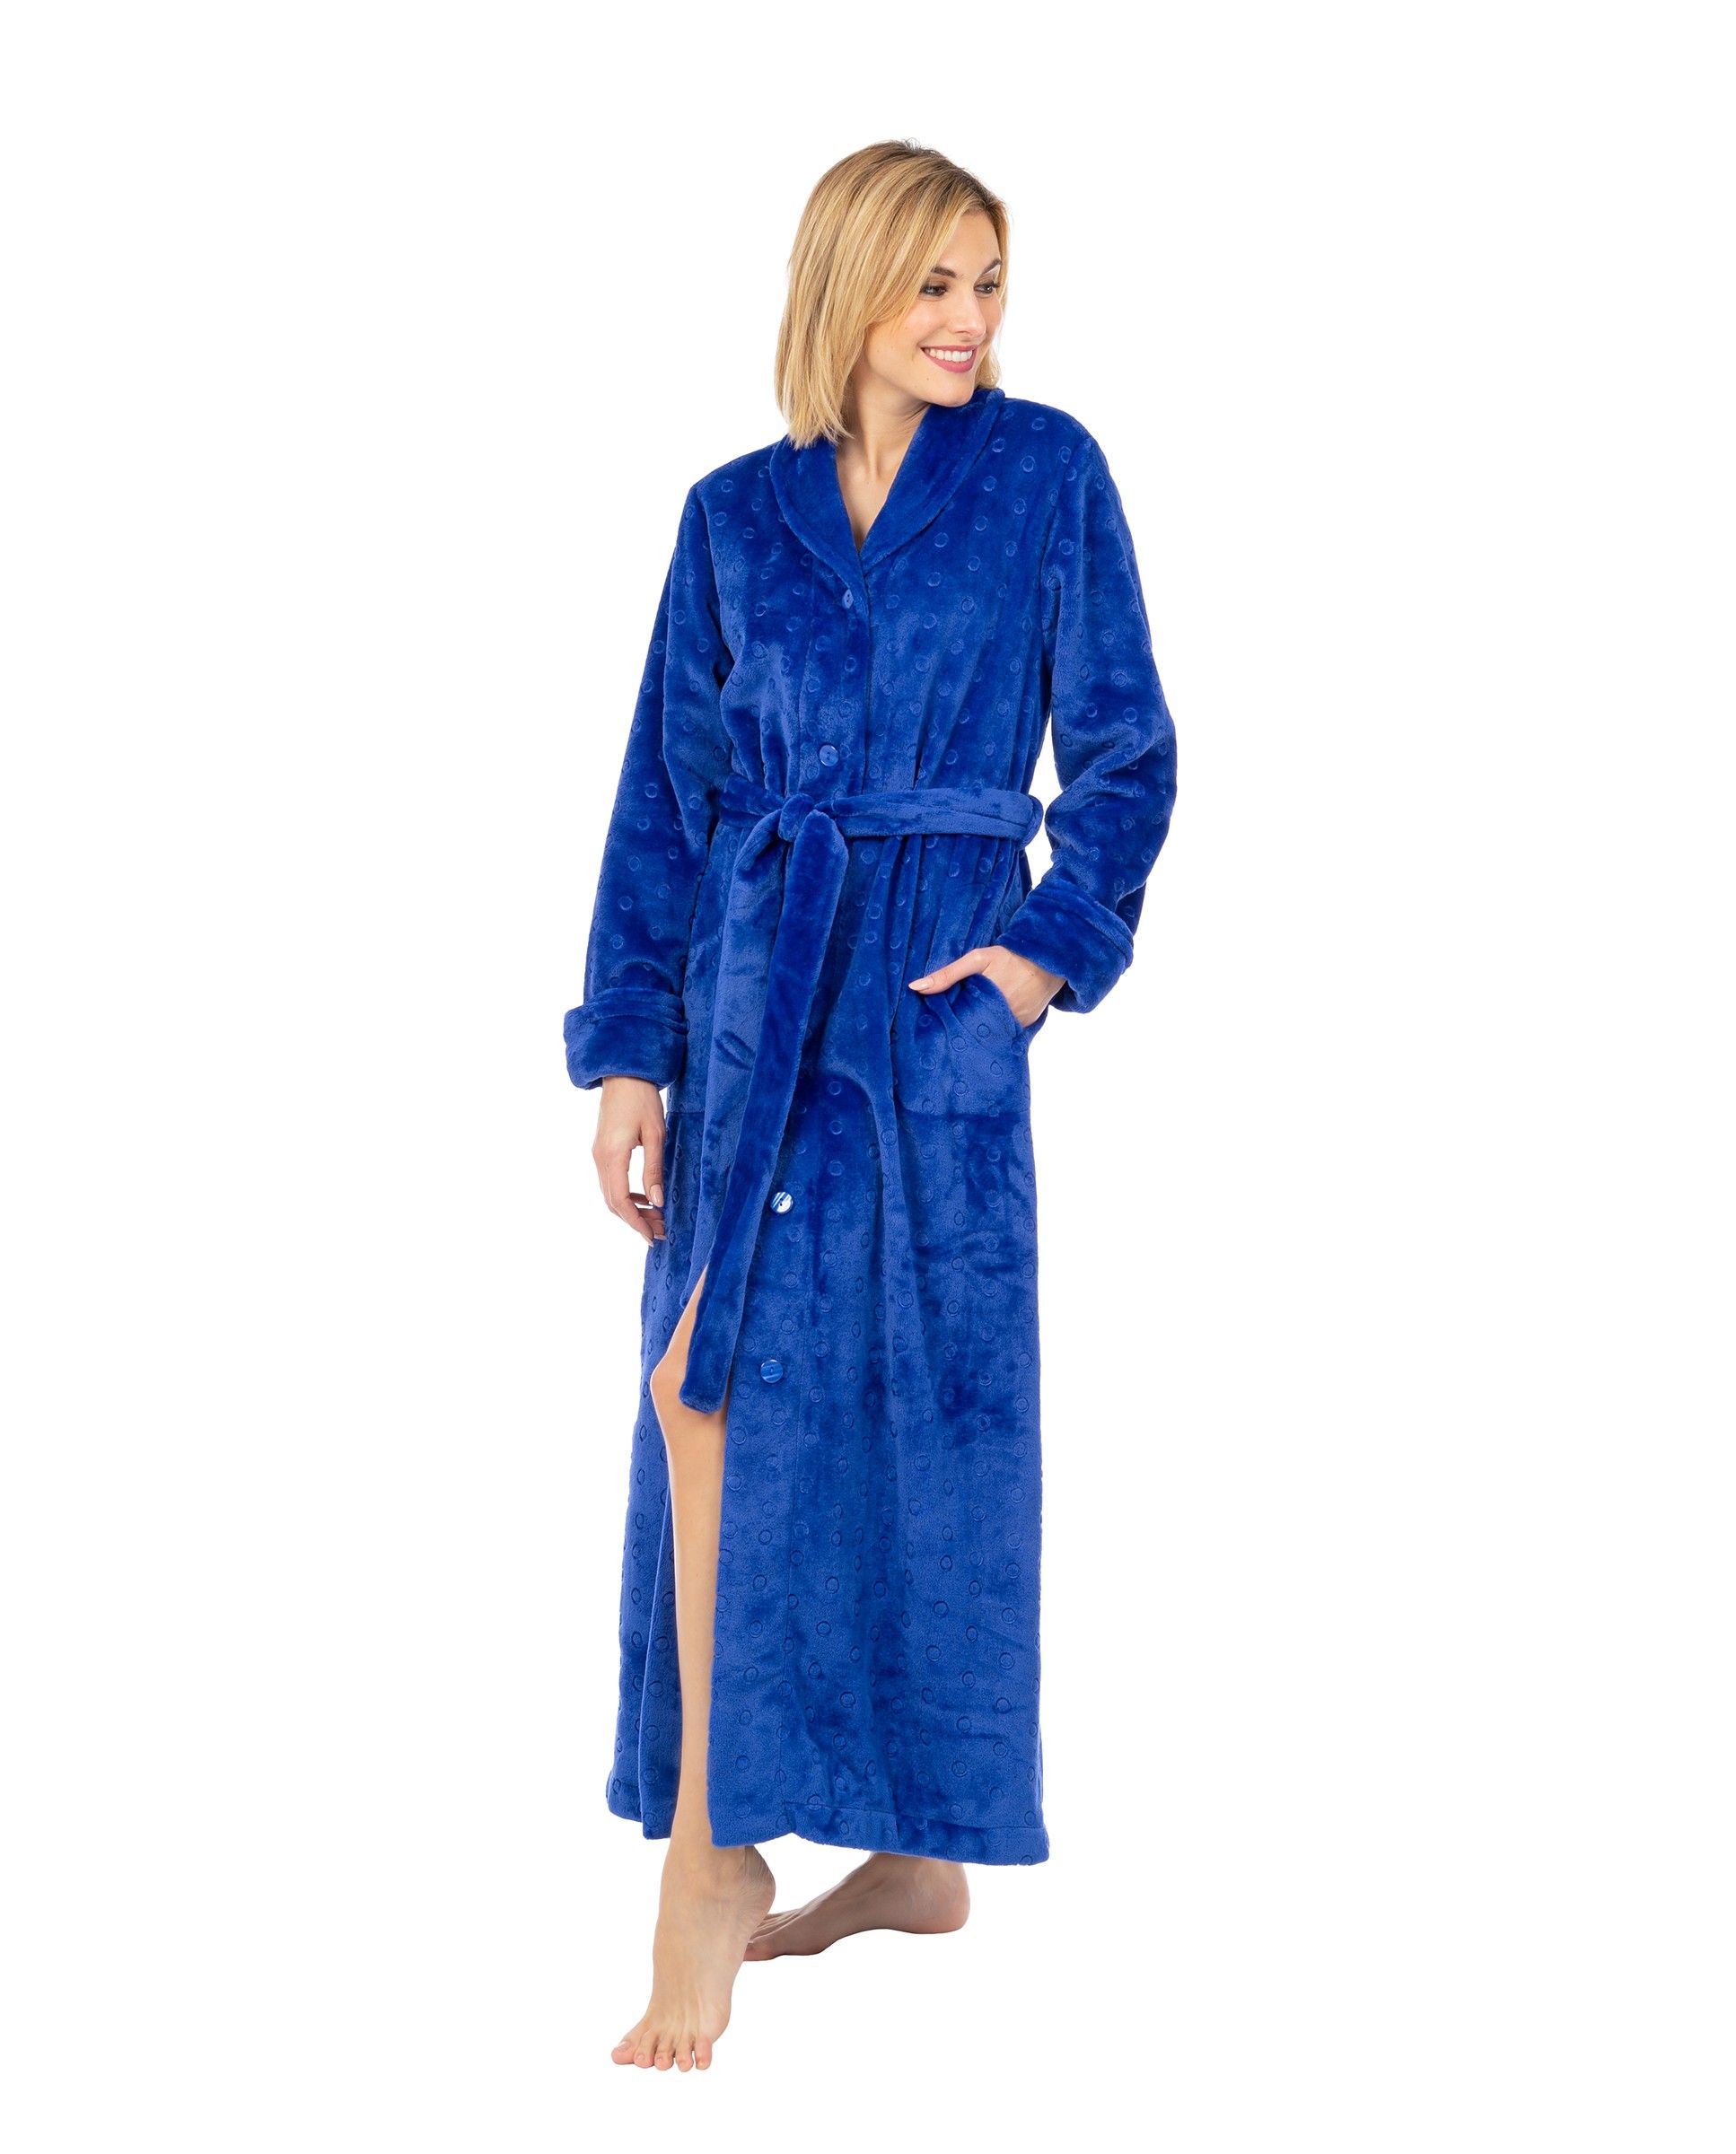 Warm women's long winter dressing gown with pockets and belt.